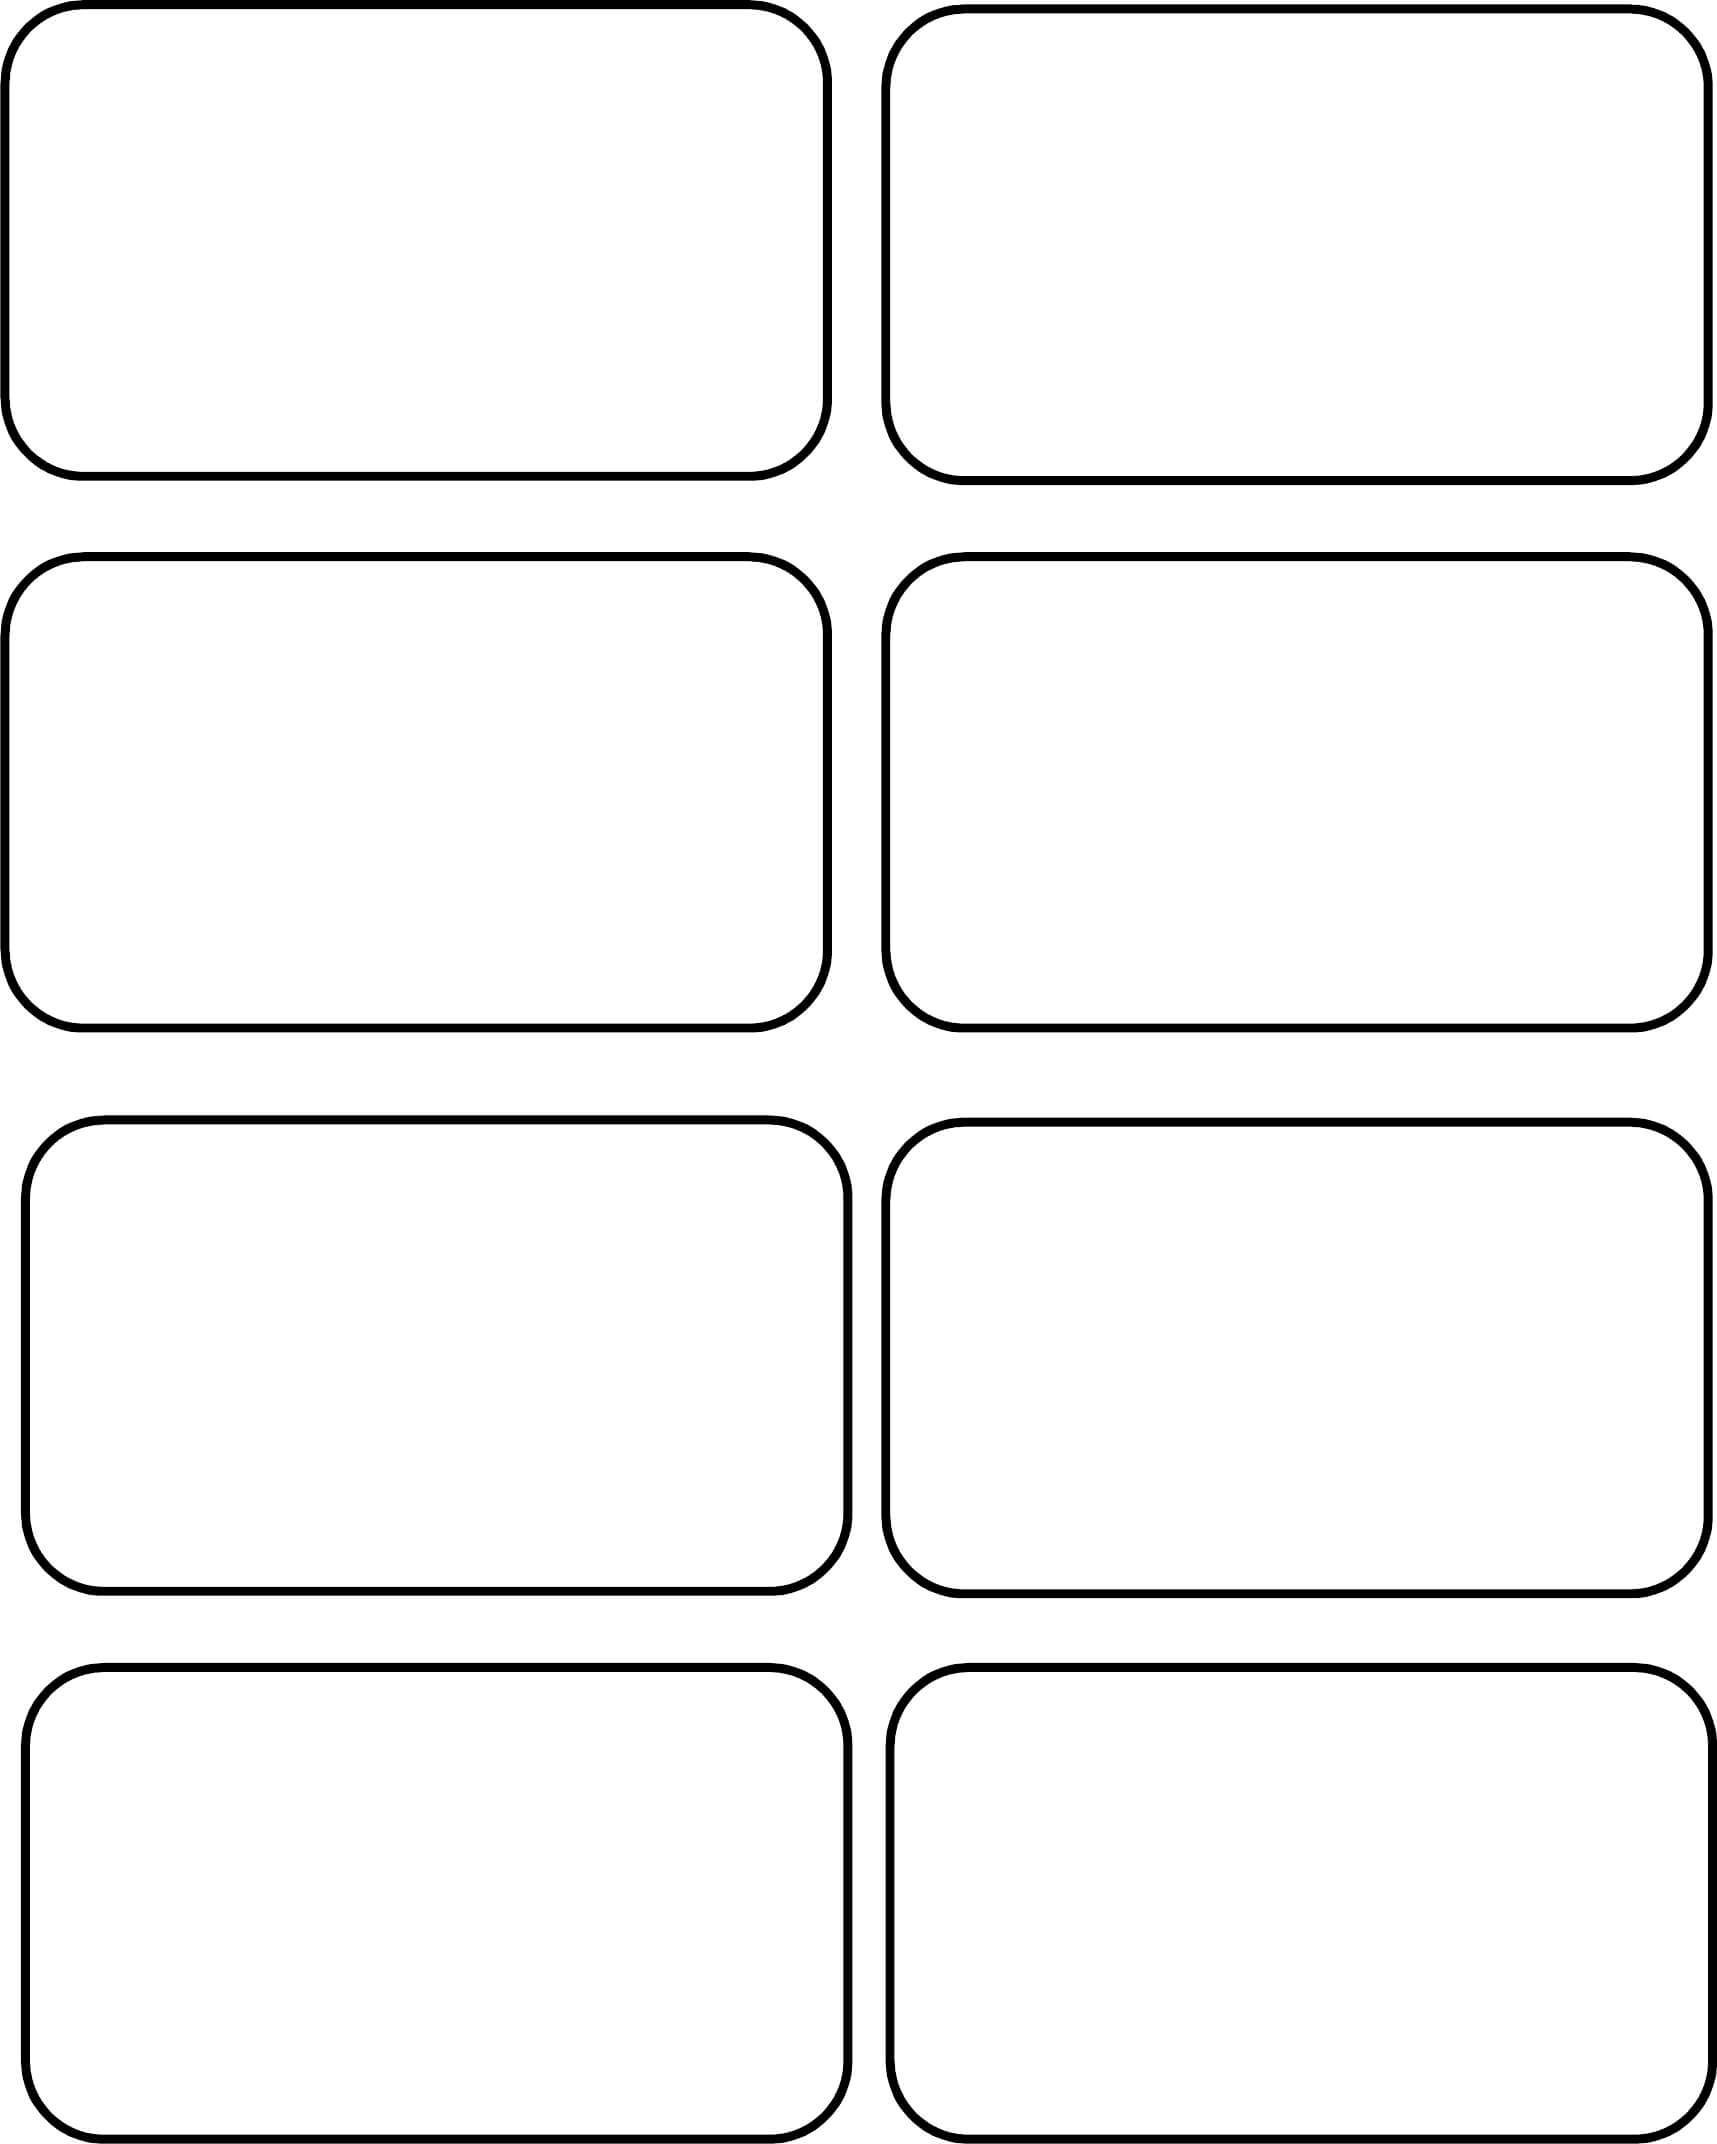 Printable Luggage Tag Templates | Download Them Or Print With Blank Luggage Tag Template